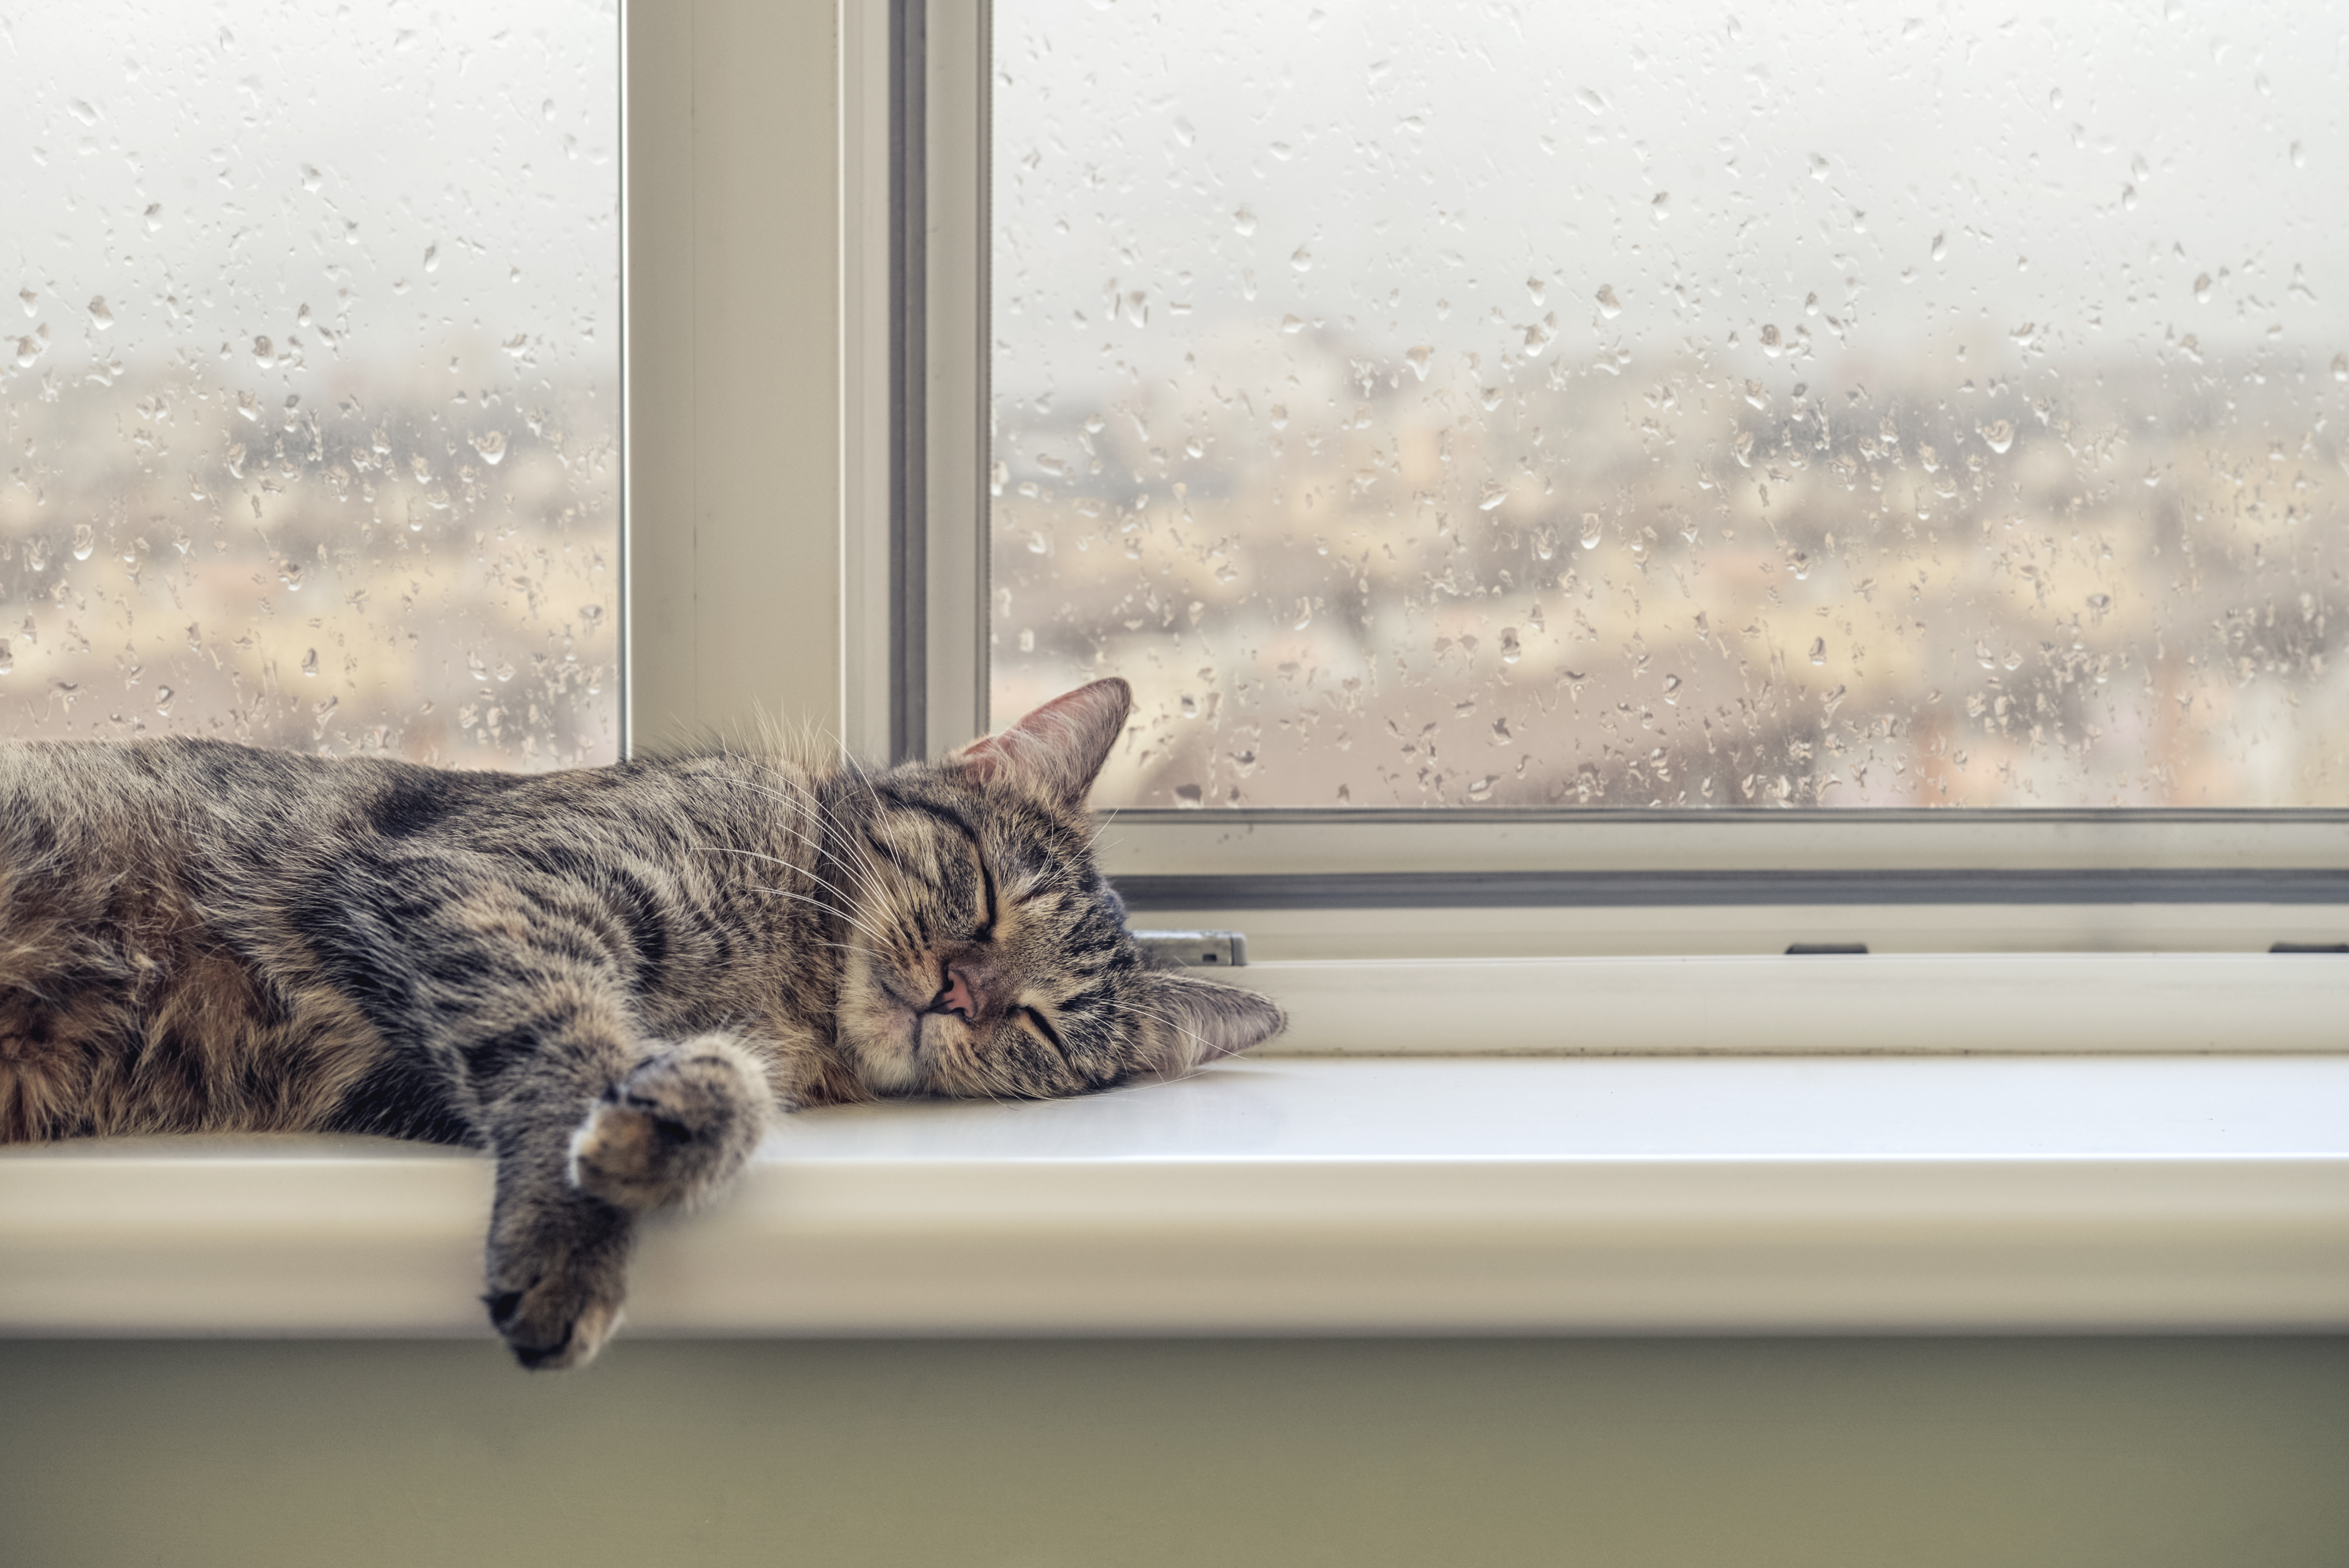 A cute cat sleeps on the window sill during a rainy day